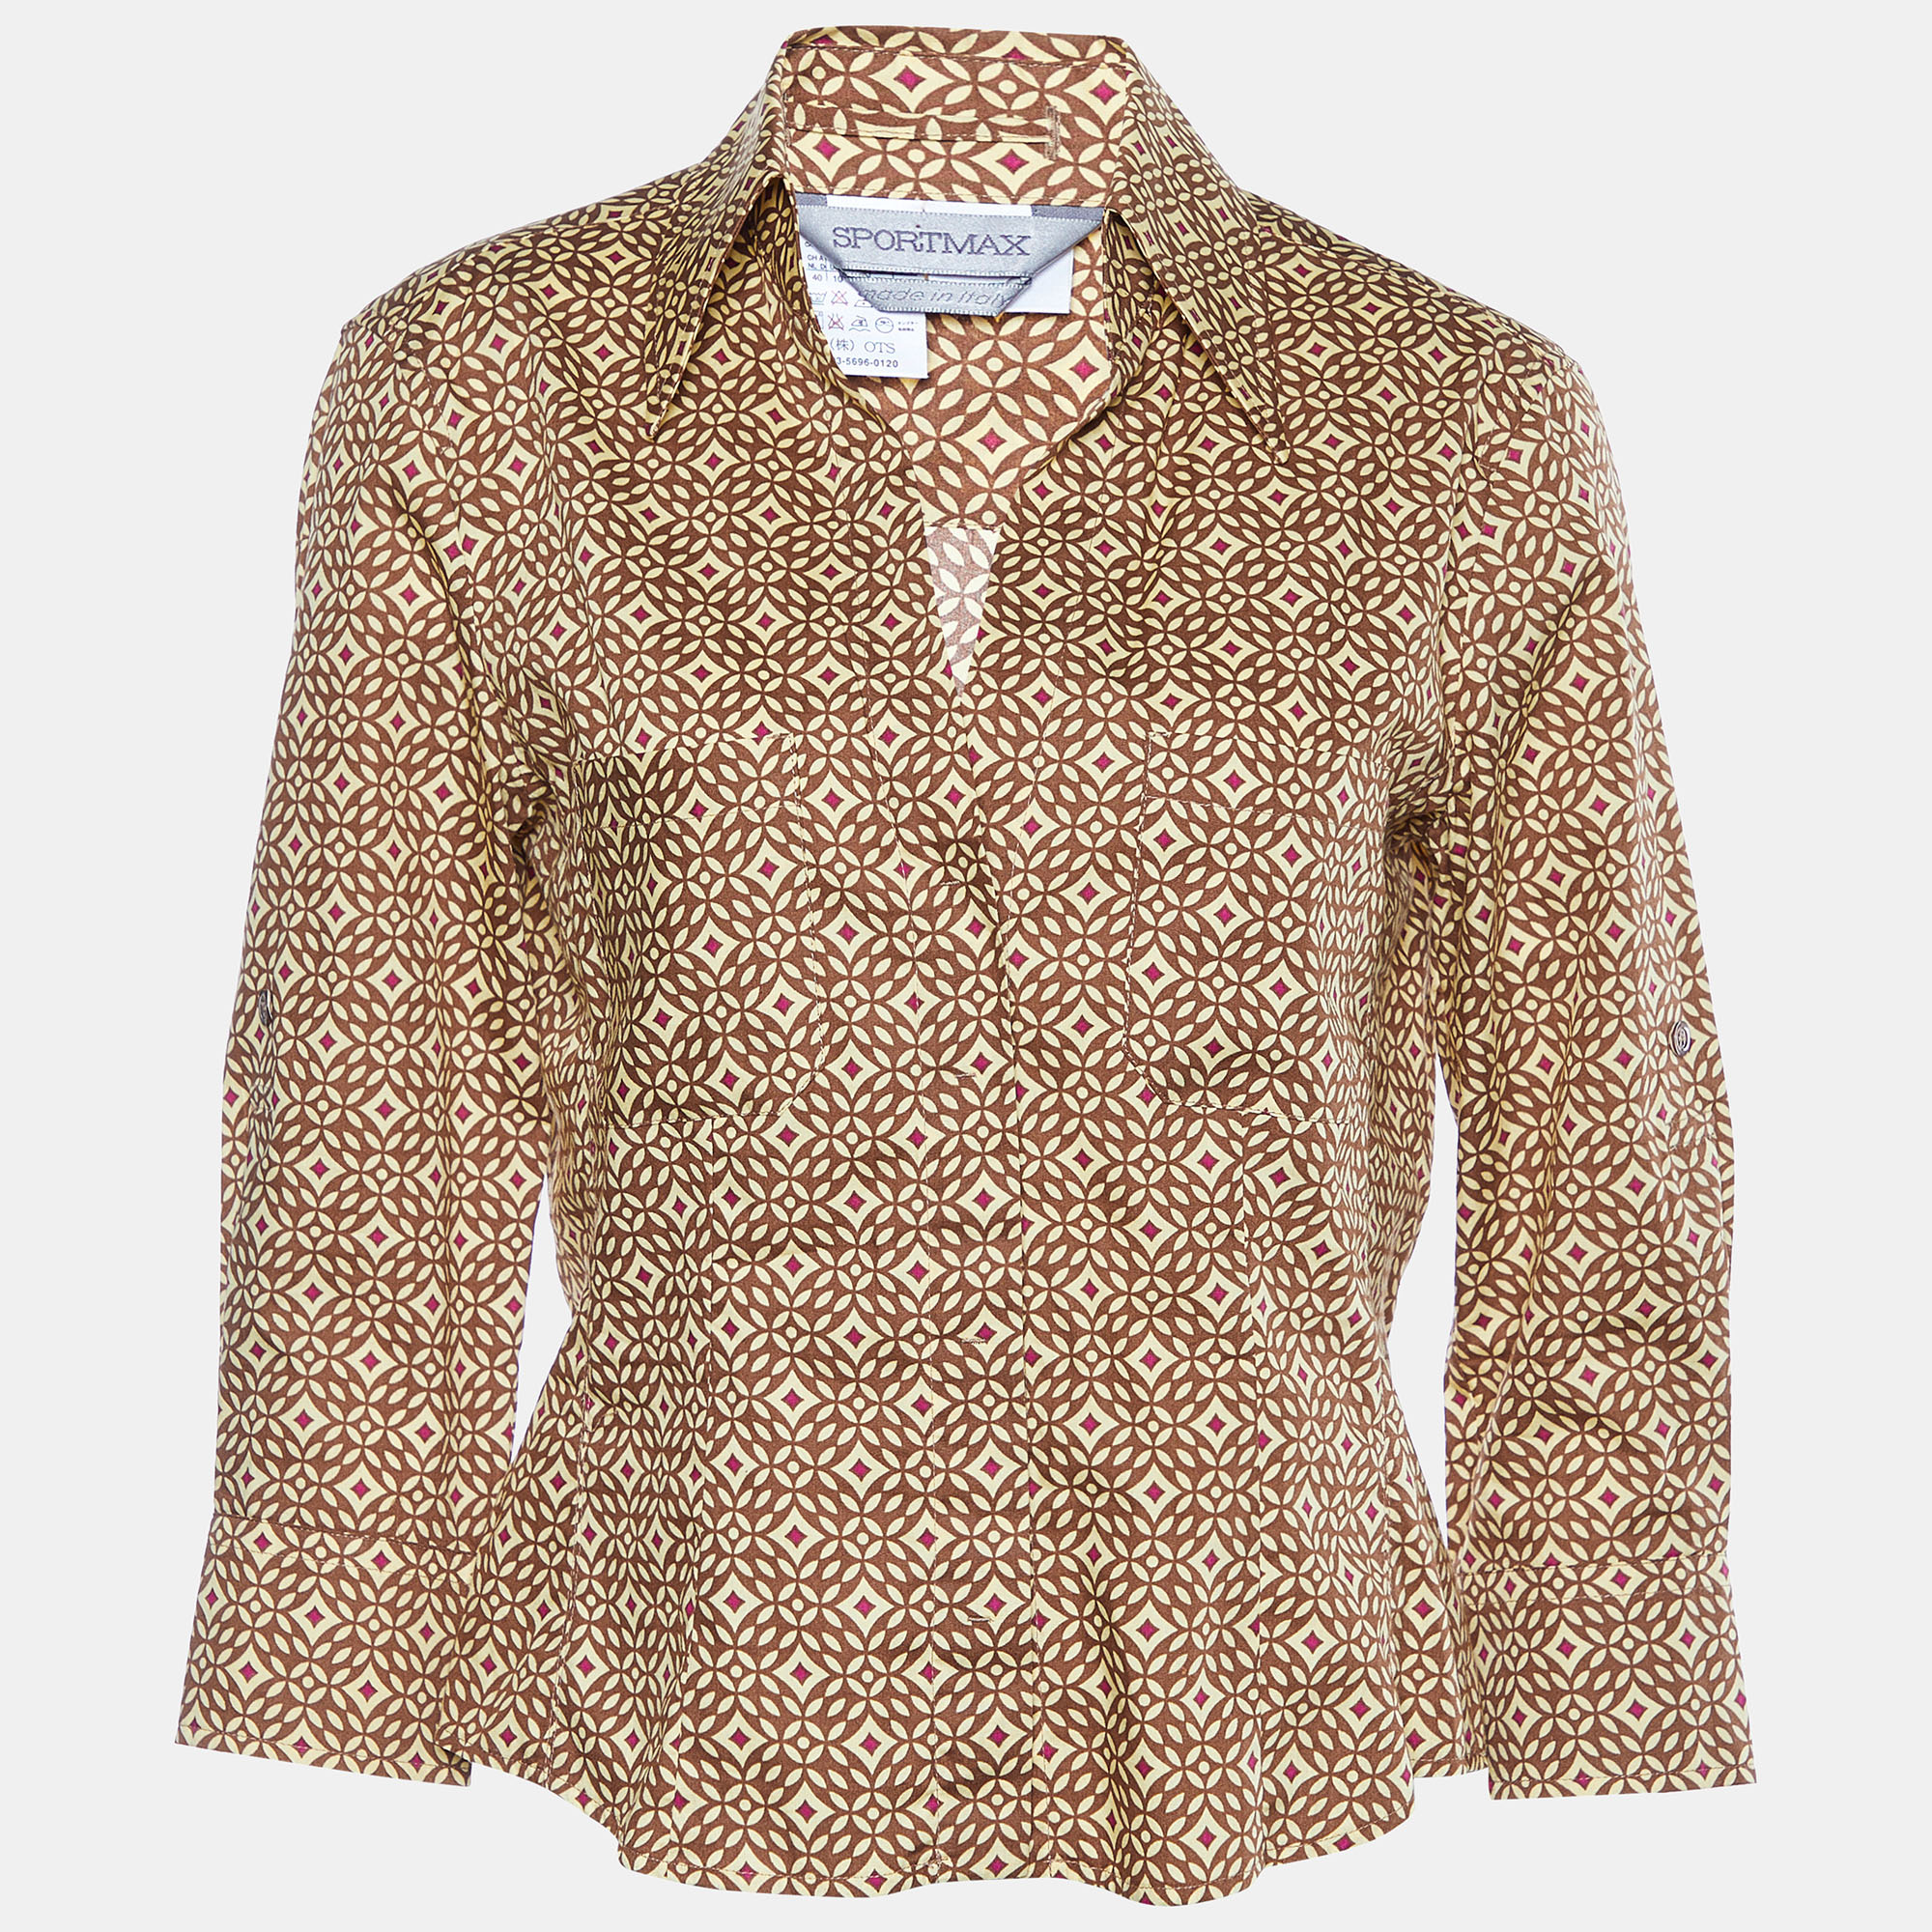 Pre-owned Sportmax Brown Printed Cotton Button Front Shirt M